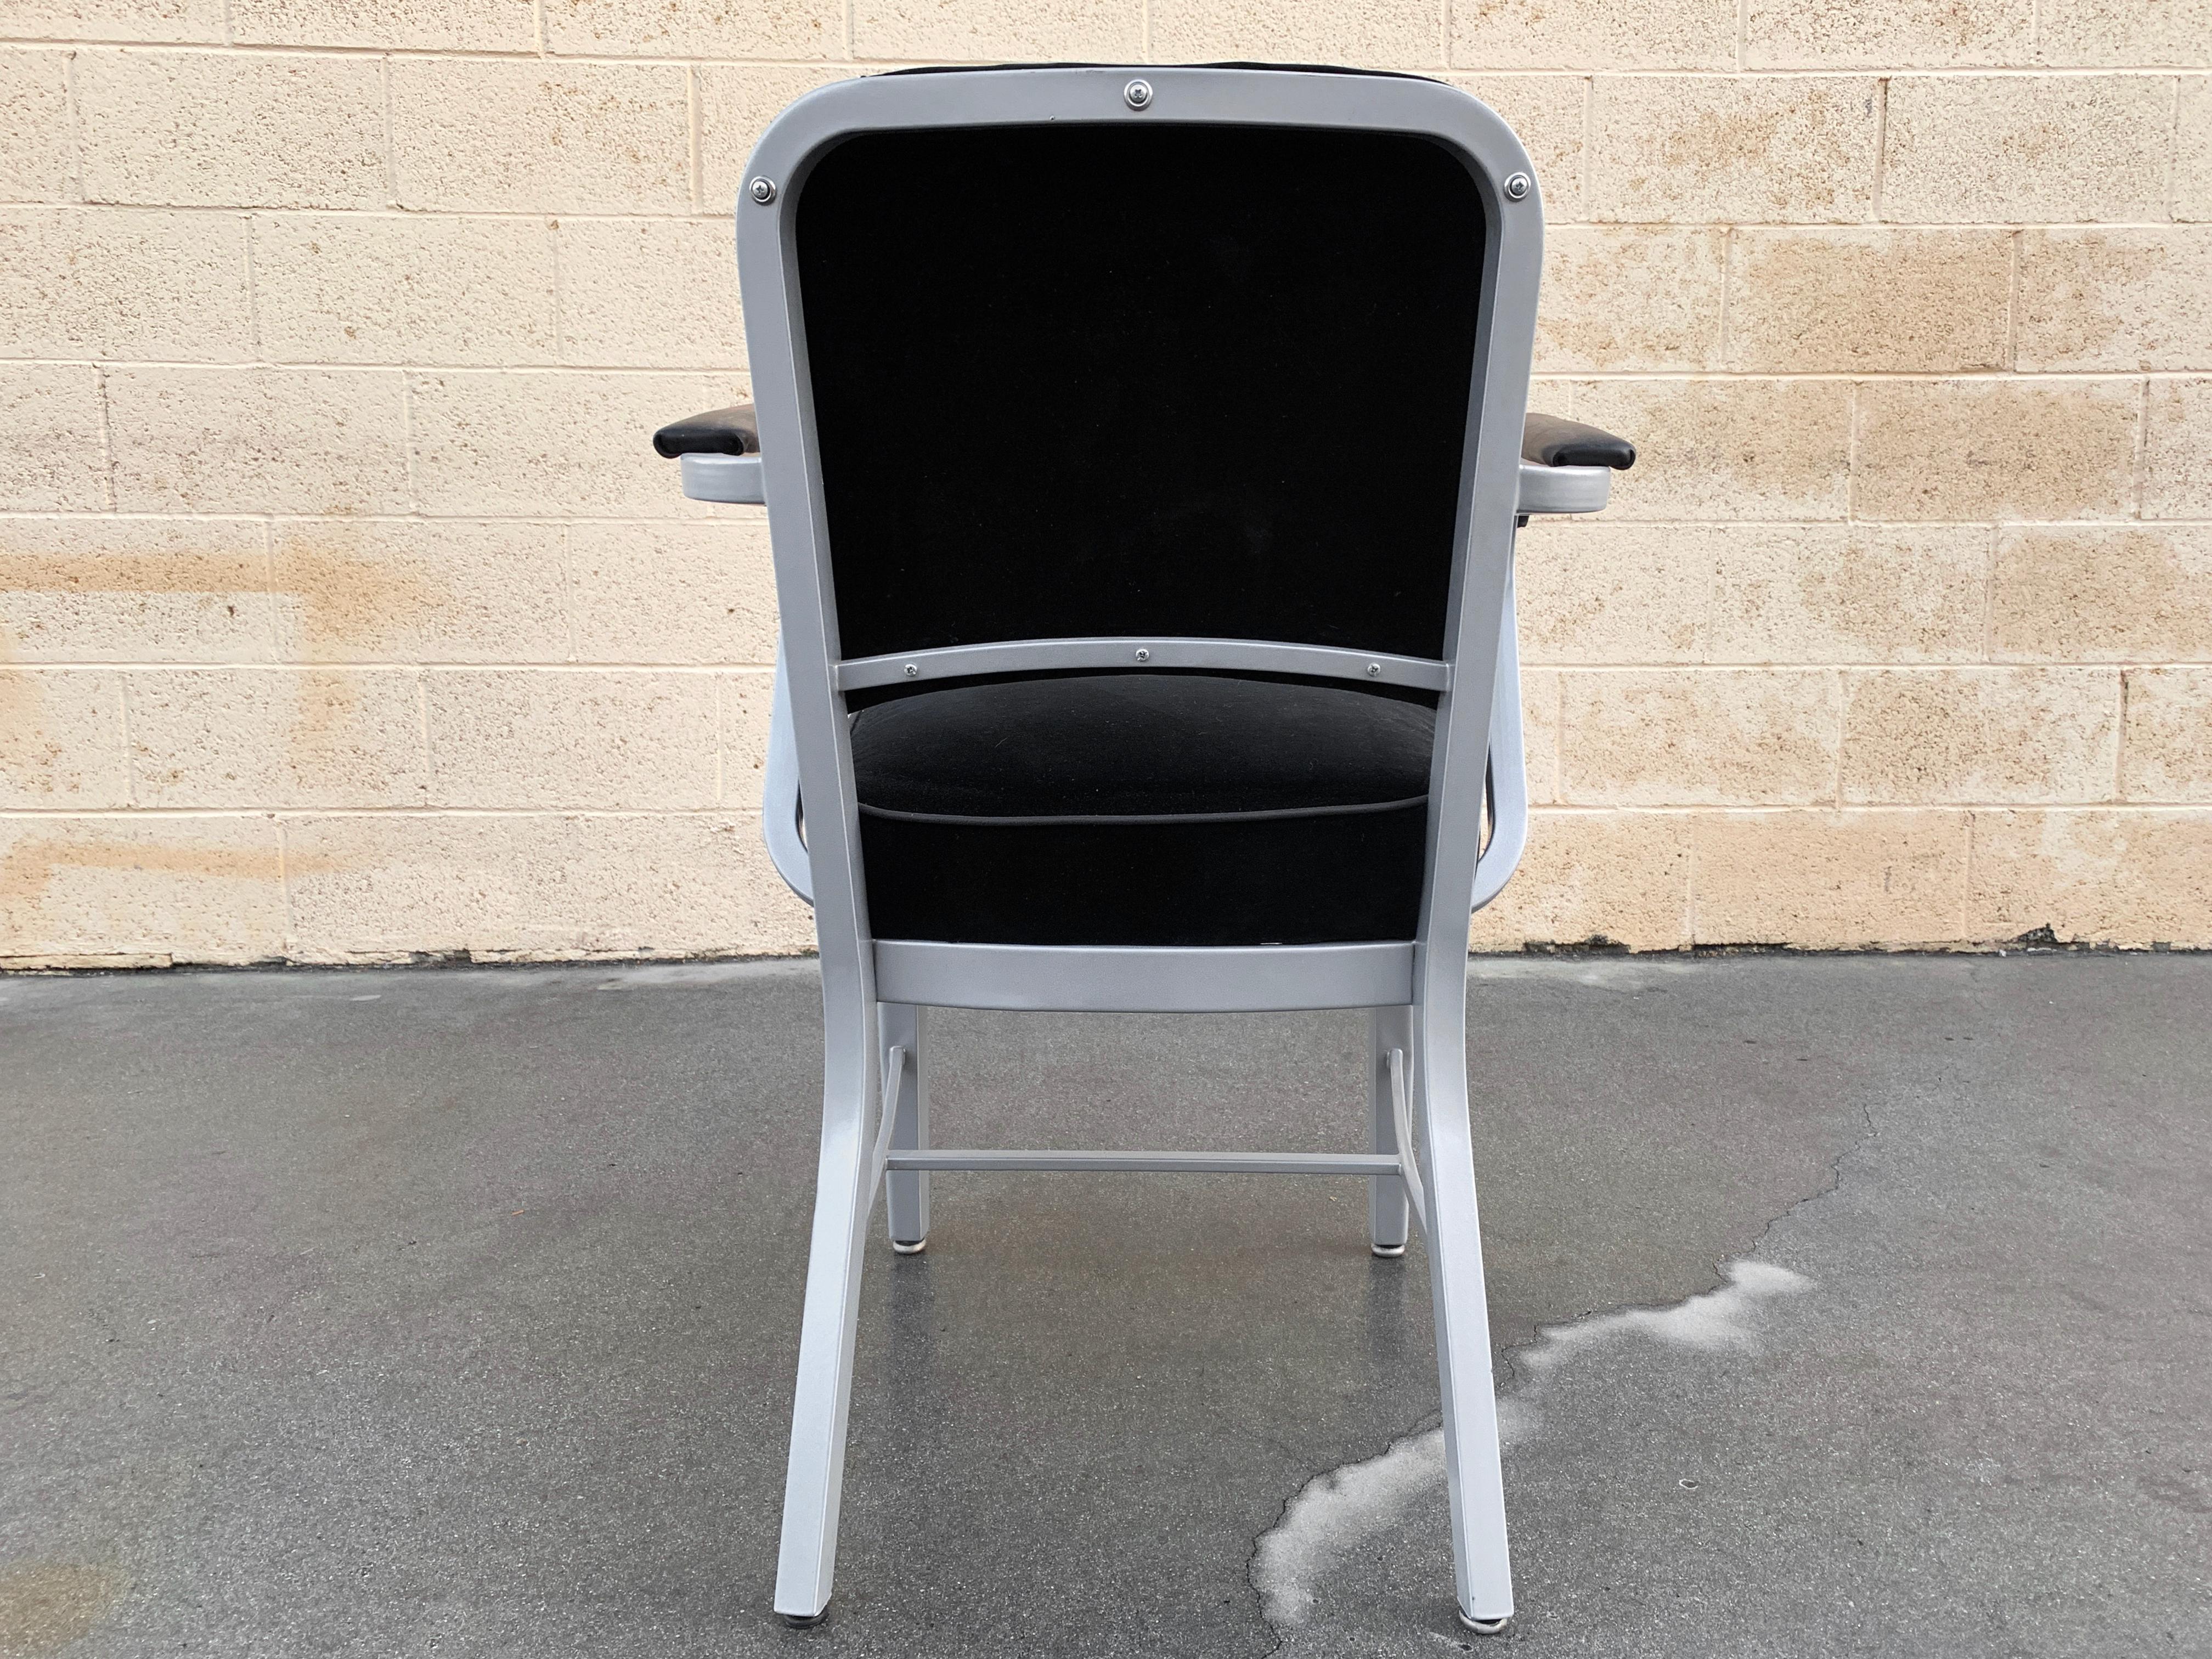 Powder-Coated Midcentury Steel Tanker Armchair, Refinished in Bengal Silver and Black Velvet